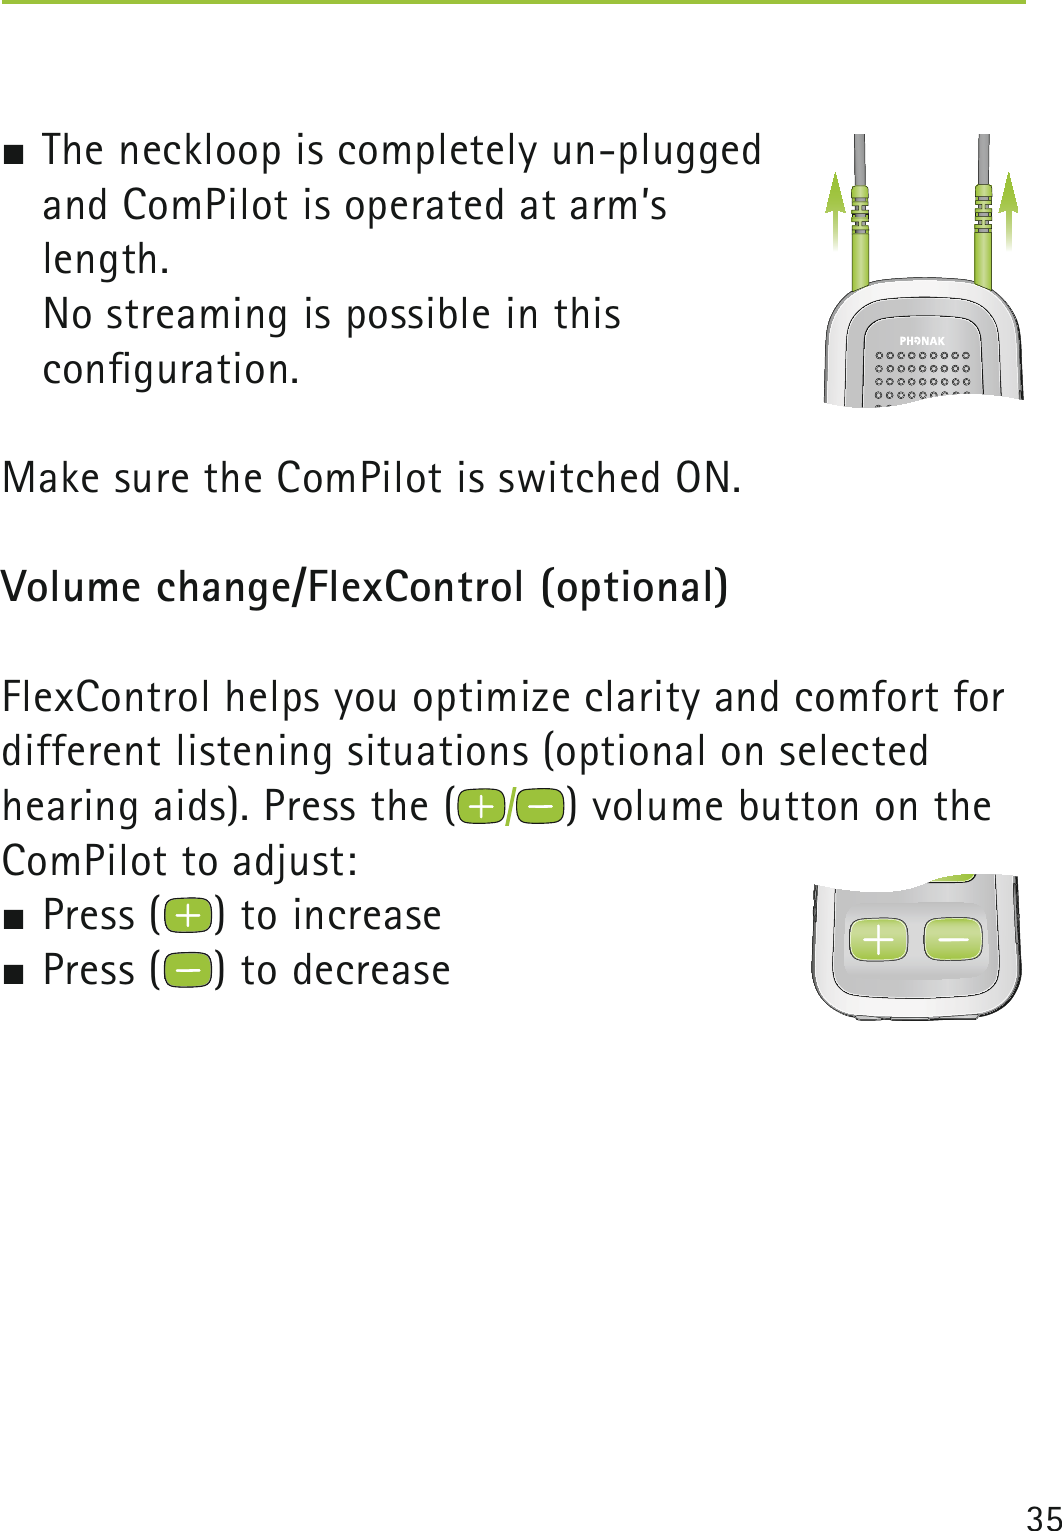 35   The neckloop is completely un-plugged  and ComPilot is operated at arm’s  length.  No streaming is possible in this  conﬁguration. Make sure the ComPilot is switched ON.Volume change/FlexControl (optional) FlexControl helps you optimize clarity and comfort for different listening situations (optional on selected hearing aids). Press the ( ) volume button on the ComPilot to adjust: Press ( ) to increase  Press ( ) to decrease 